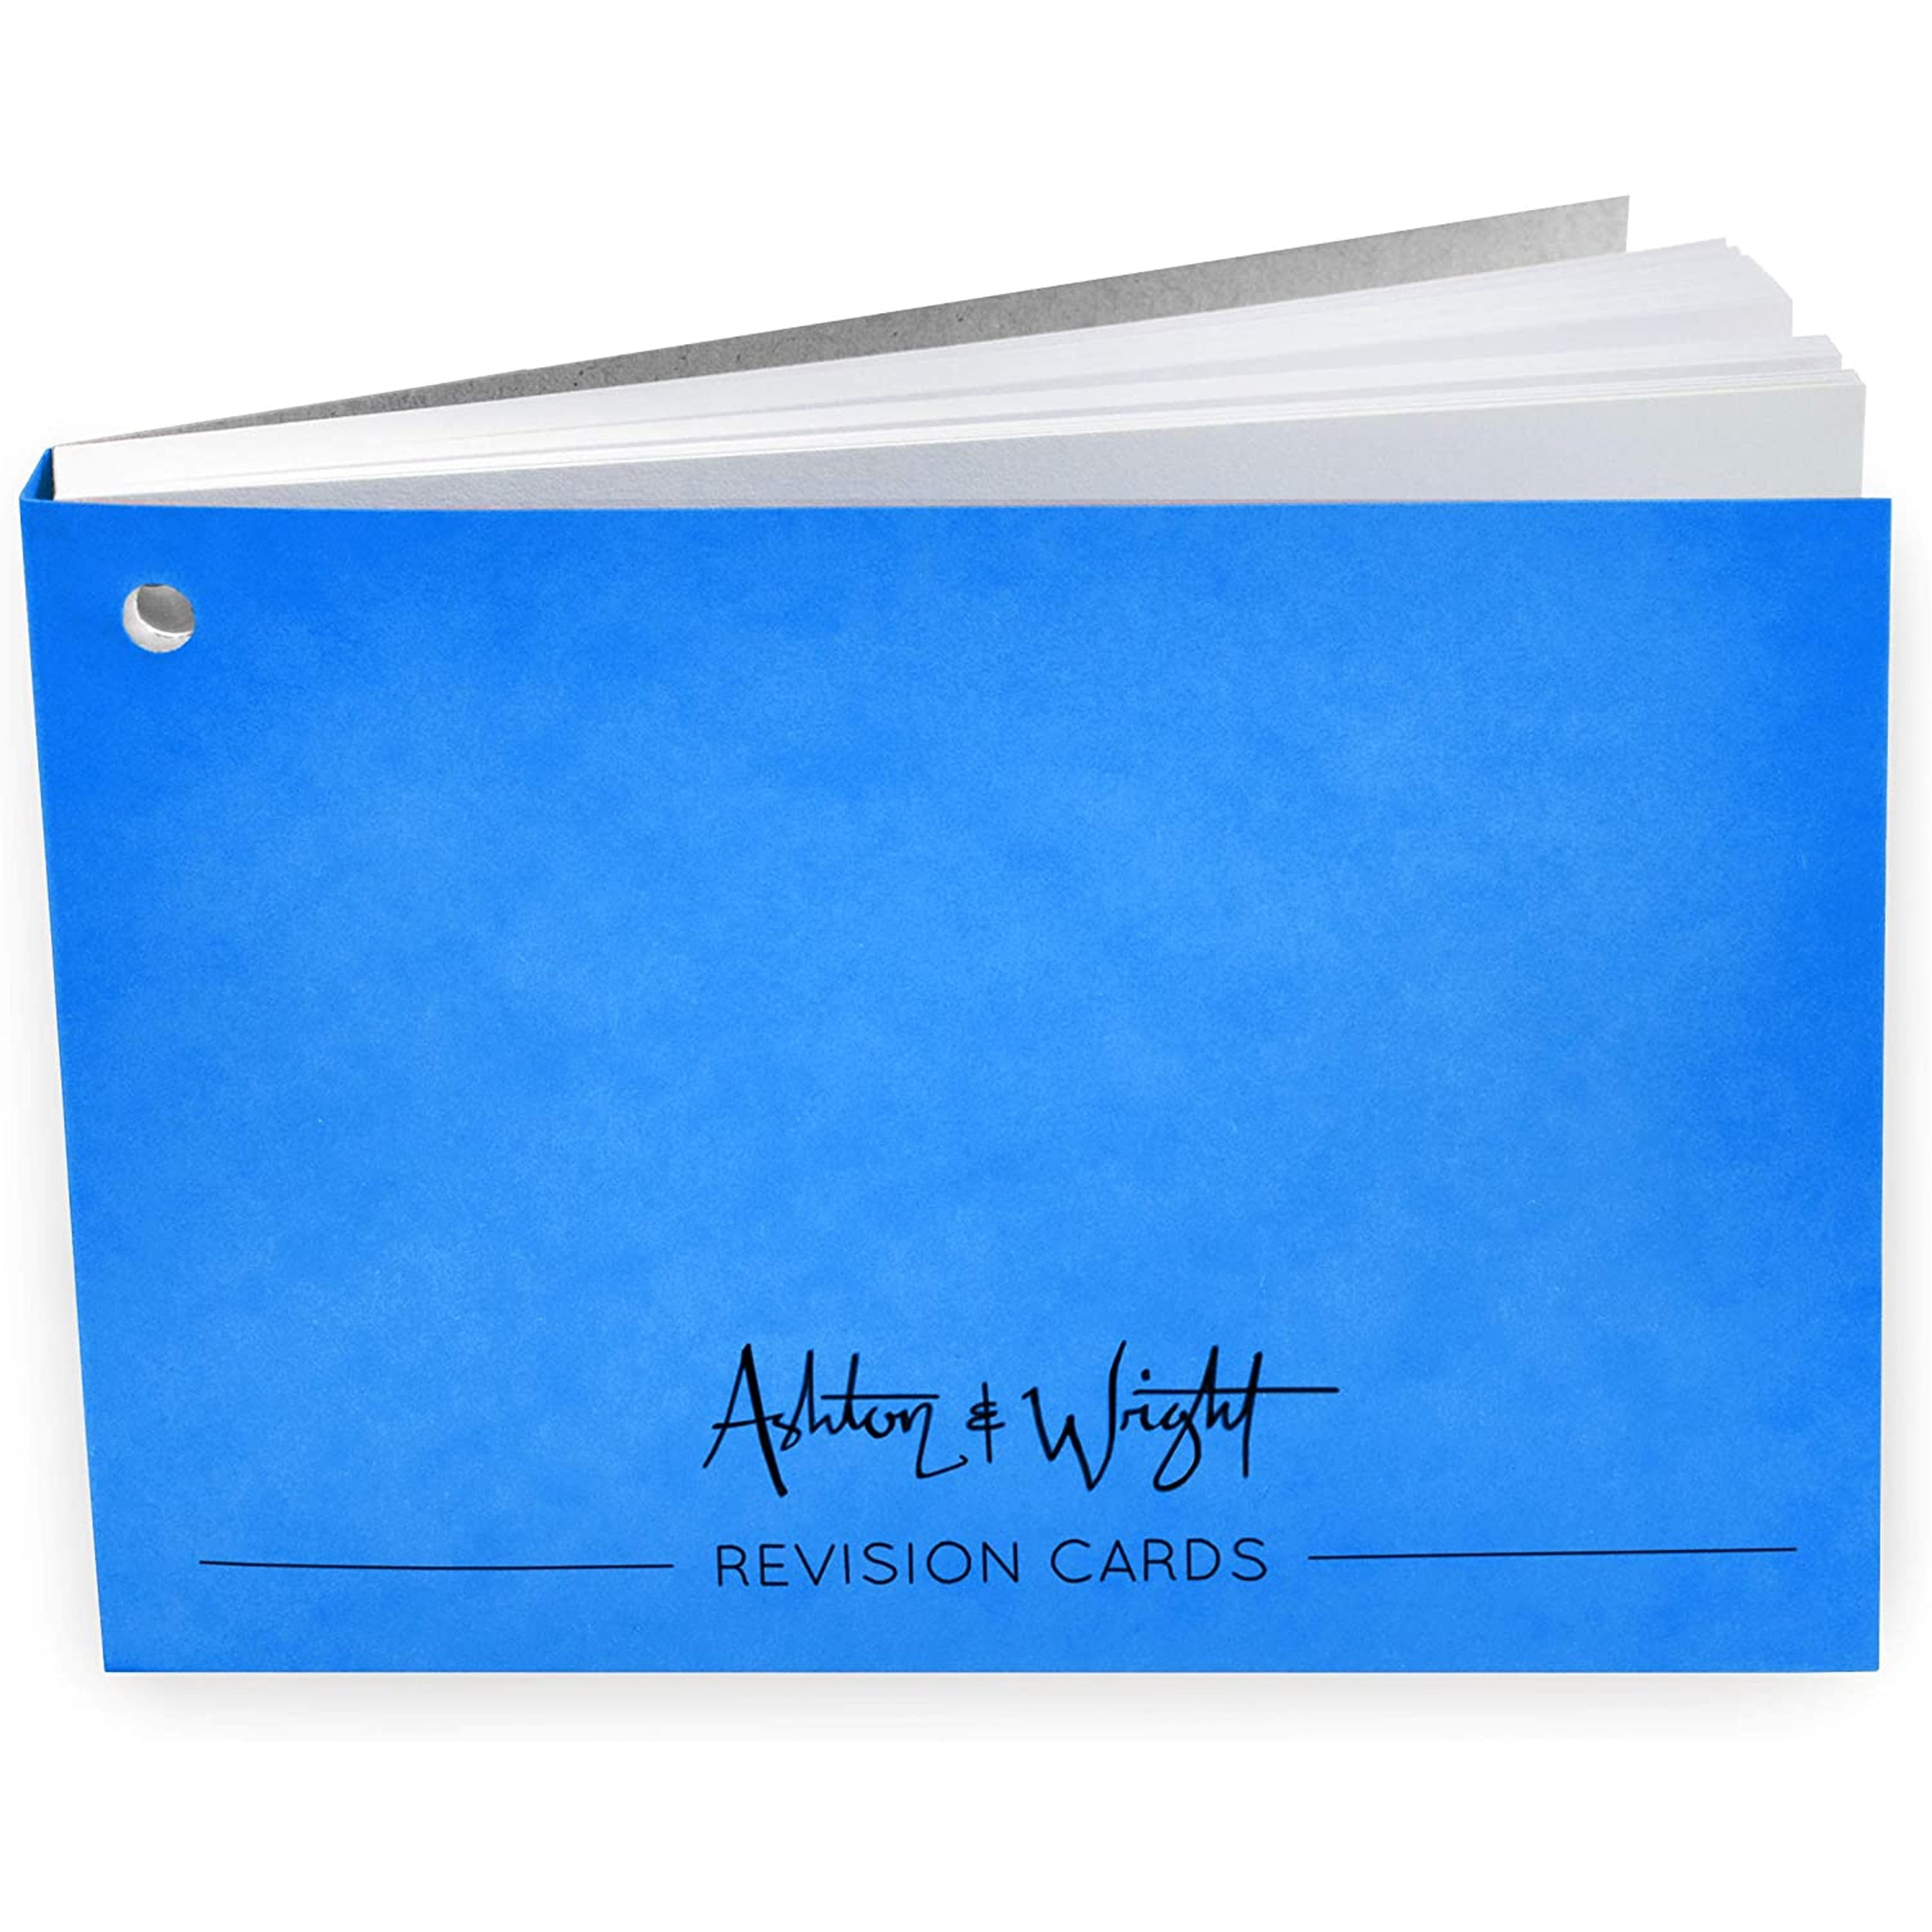 Revision Cards Book - Blue Mottled Cover